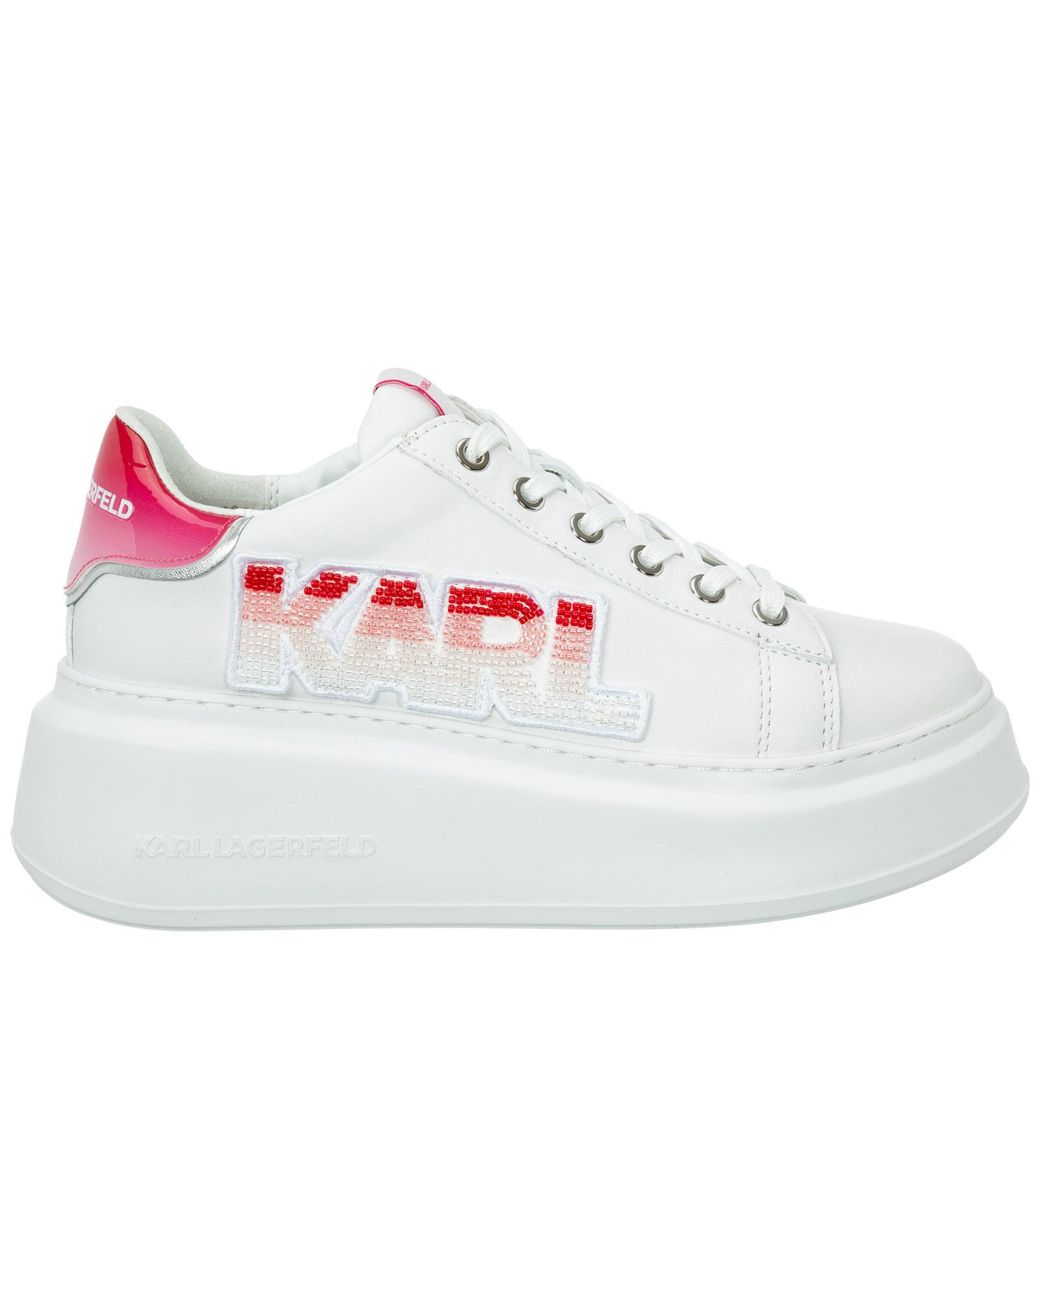 Karl Lagerfeld Shoes Leather Trainers Sneakers Anakapri in White | Lyst